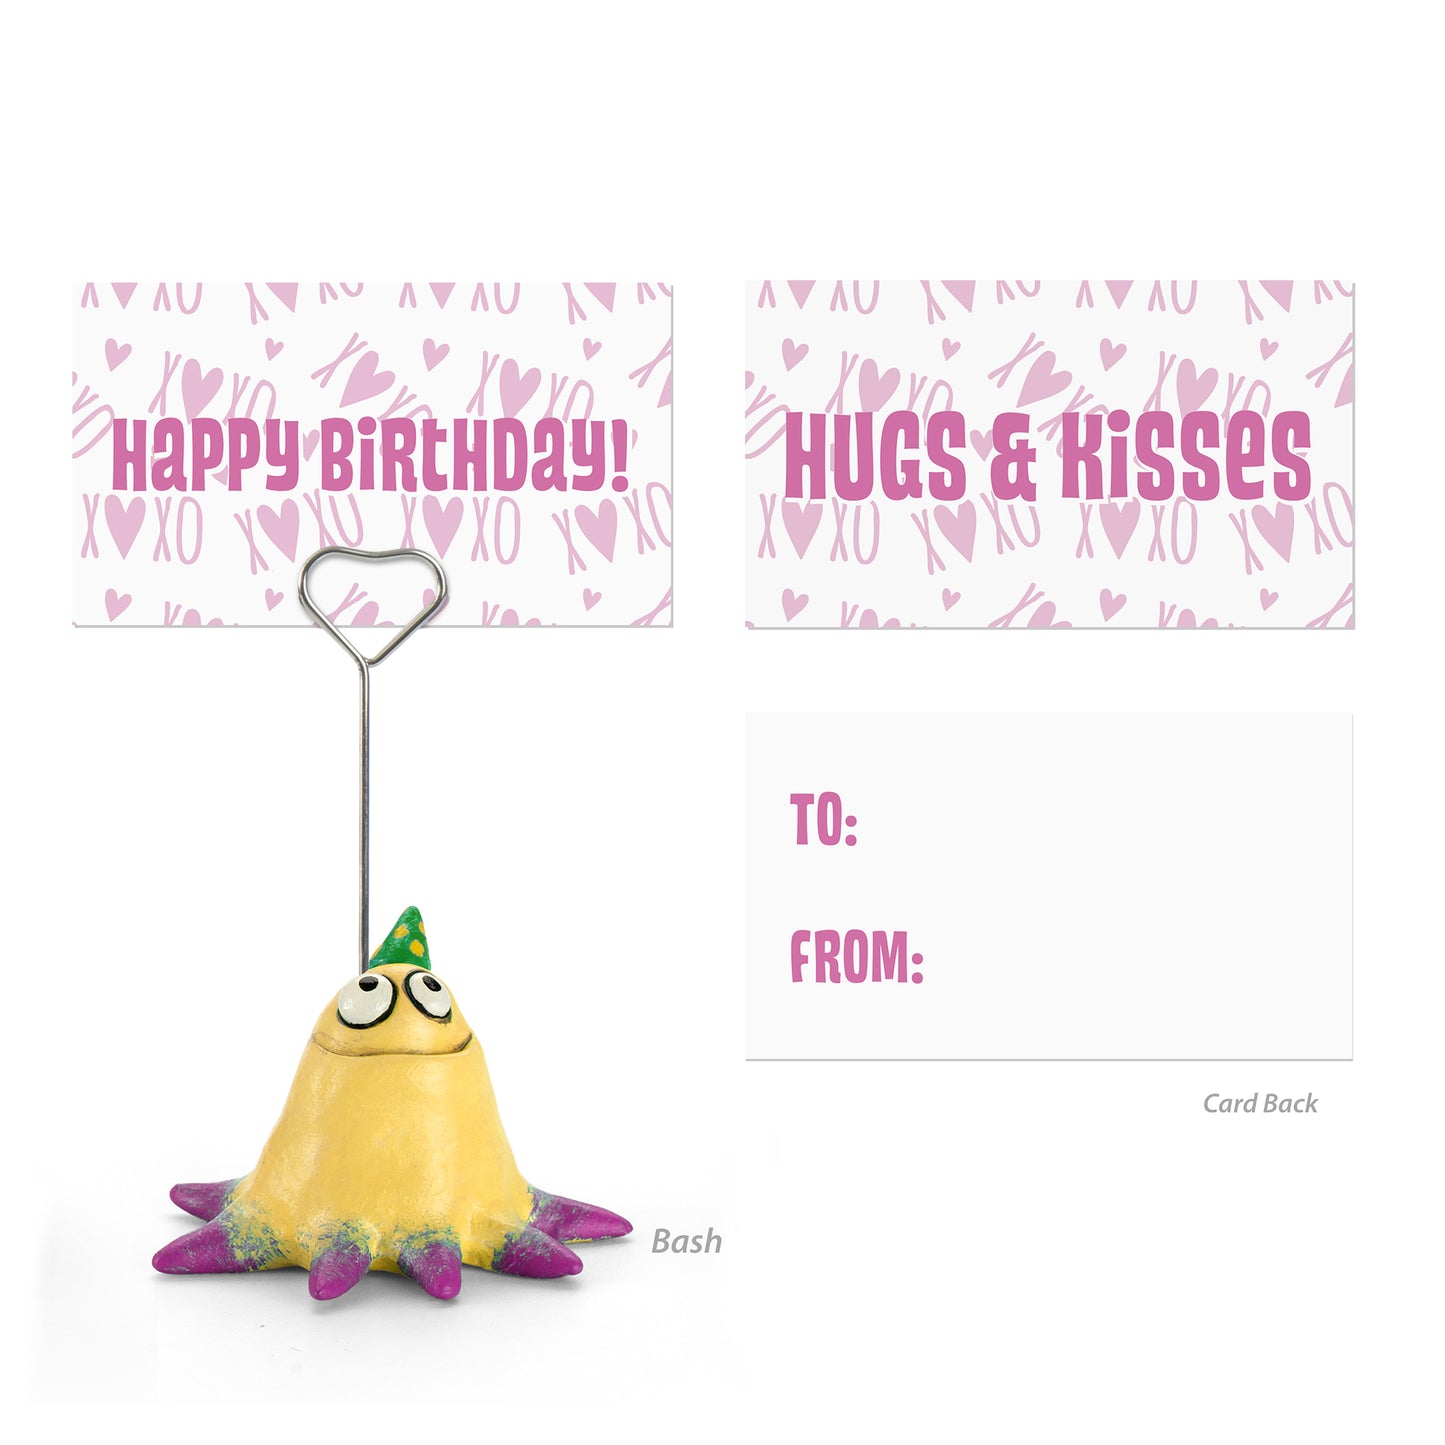 Bash the Party Blob - Comes with 2 greeting cards!